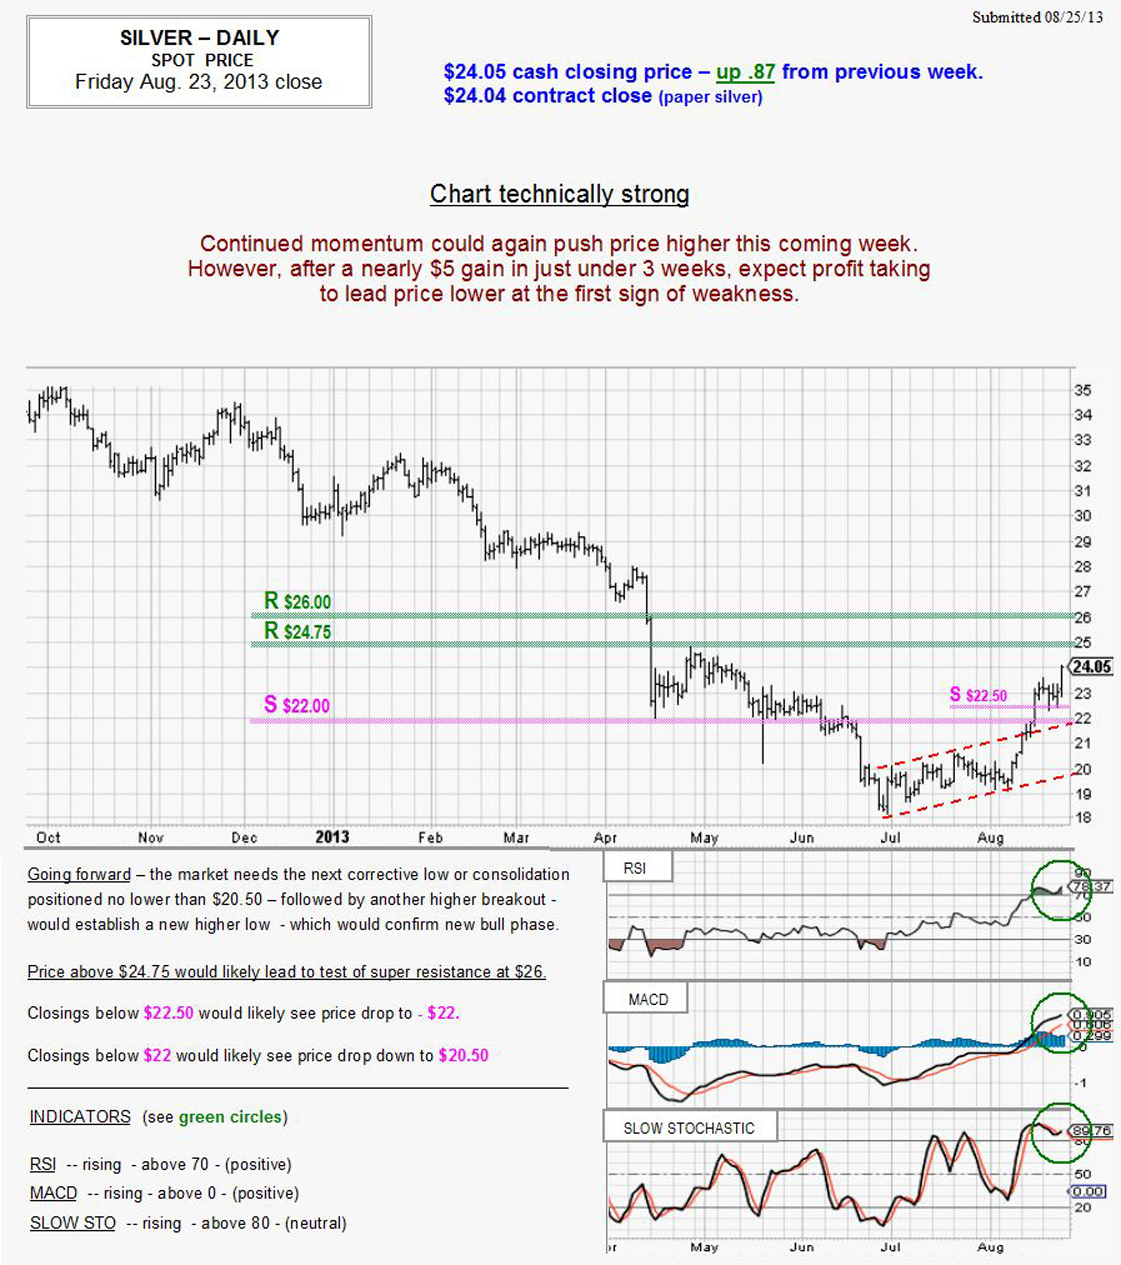 Aug 23, 2013 chart & commentary